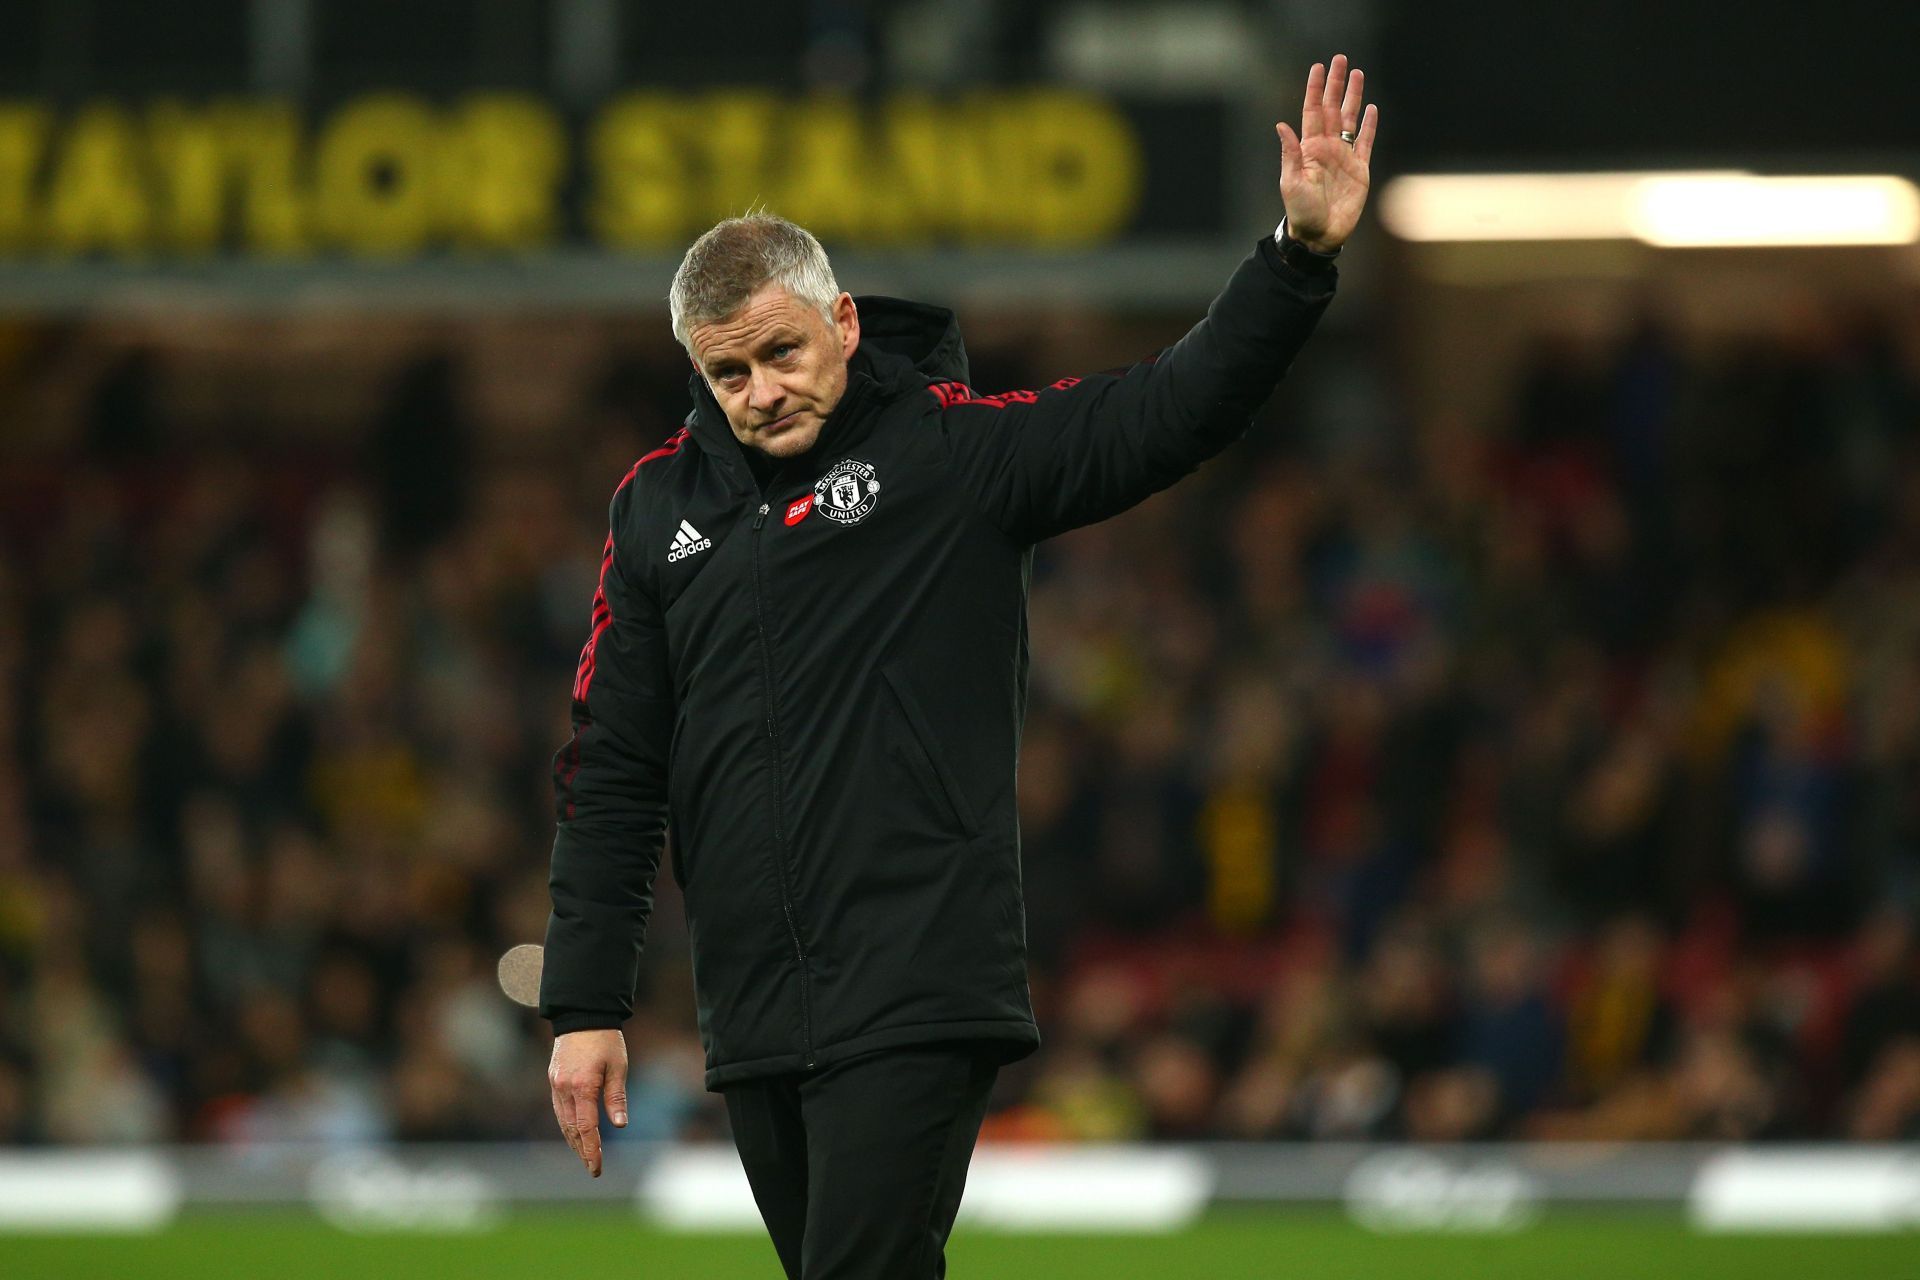 Ole Gunnar Solskjaer is yet to take up a managerial position since leaving Manchester United.